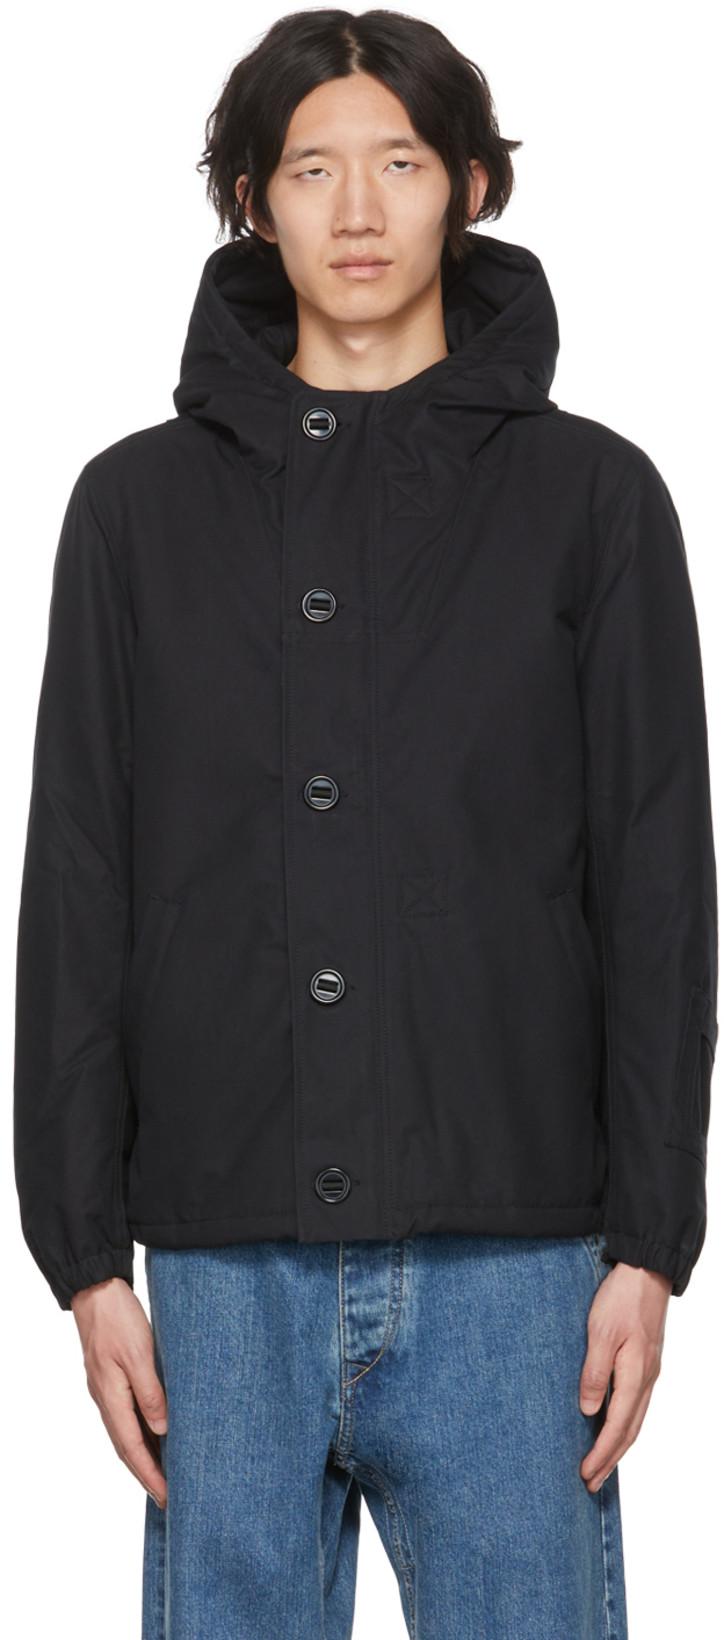 Black CM1-1 Jacket by APPLIED ART FORMS